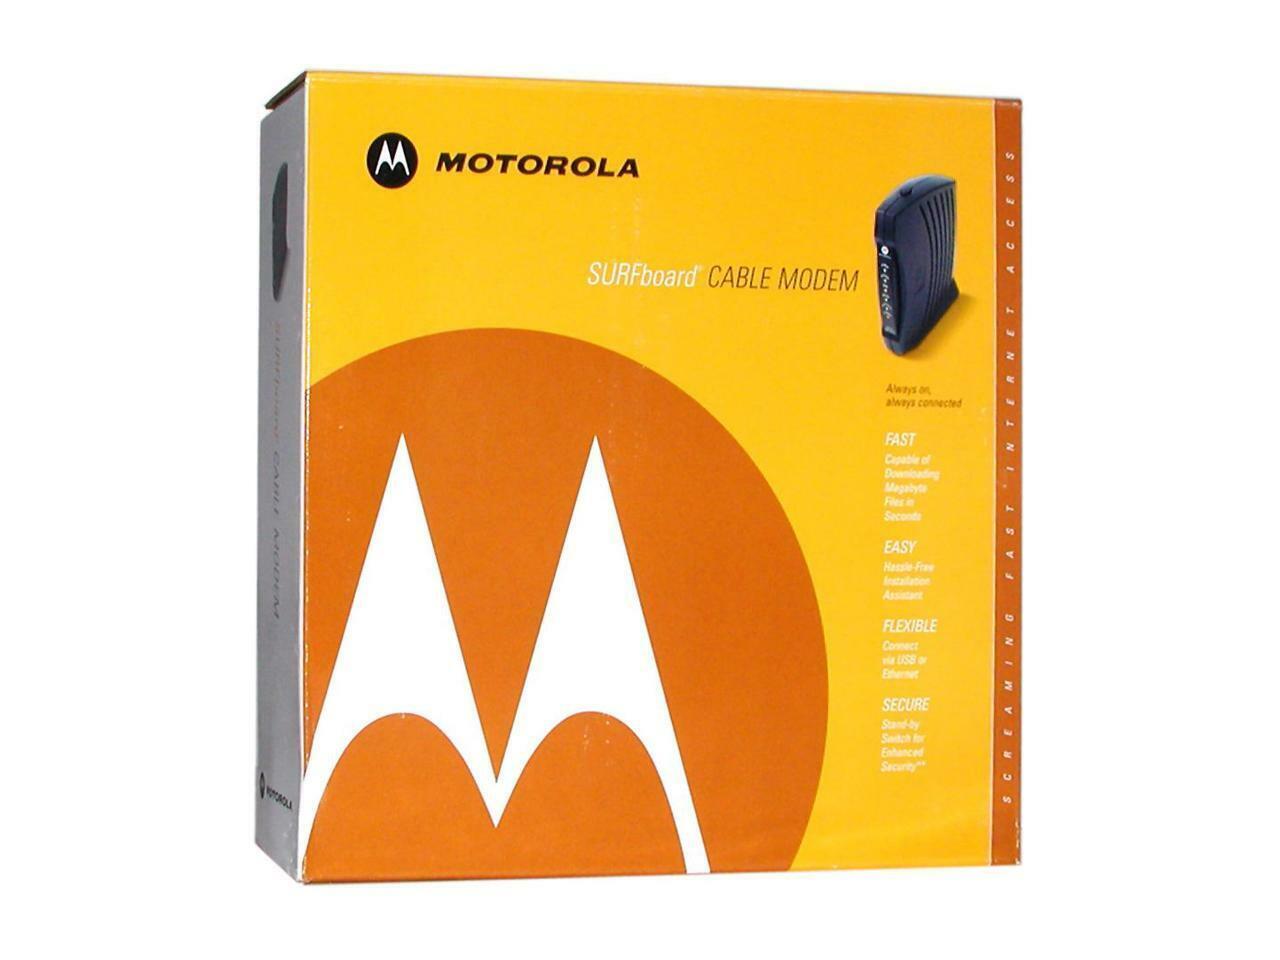 NEW Motorola SURFboard SB5100 Cable Modem - In Unopened Box